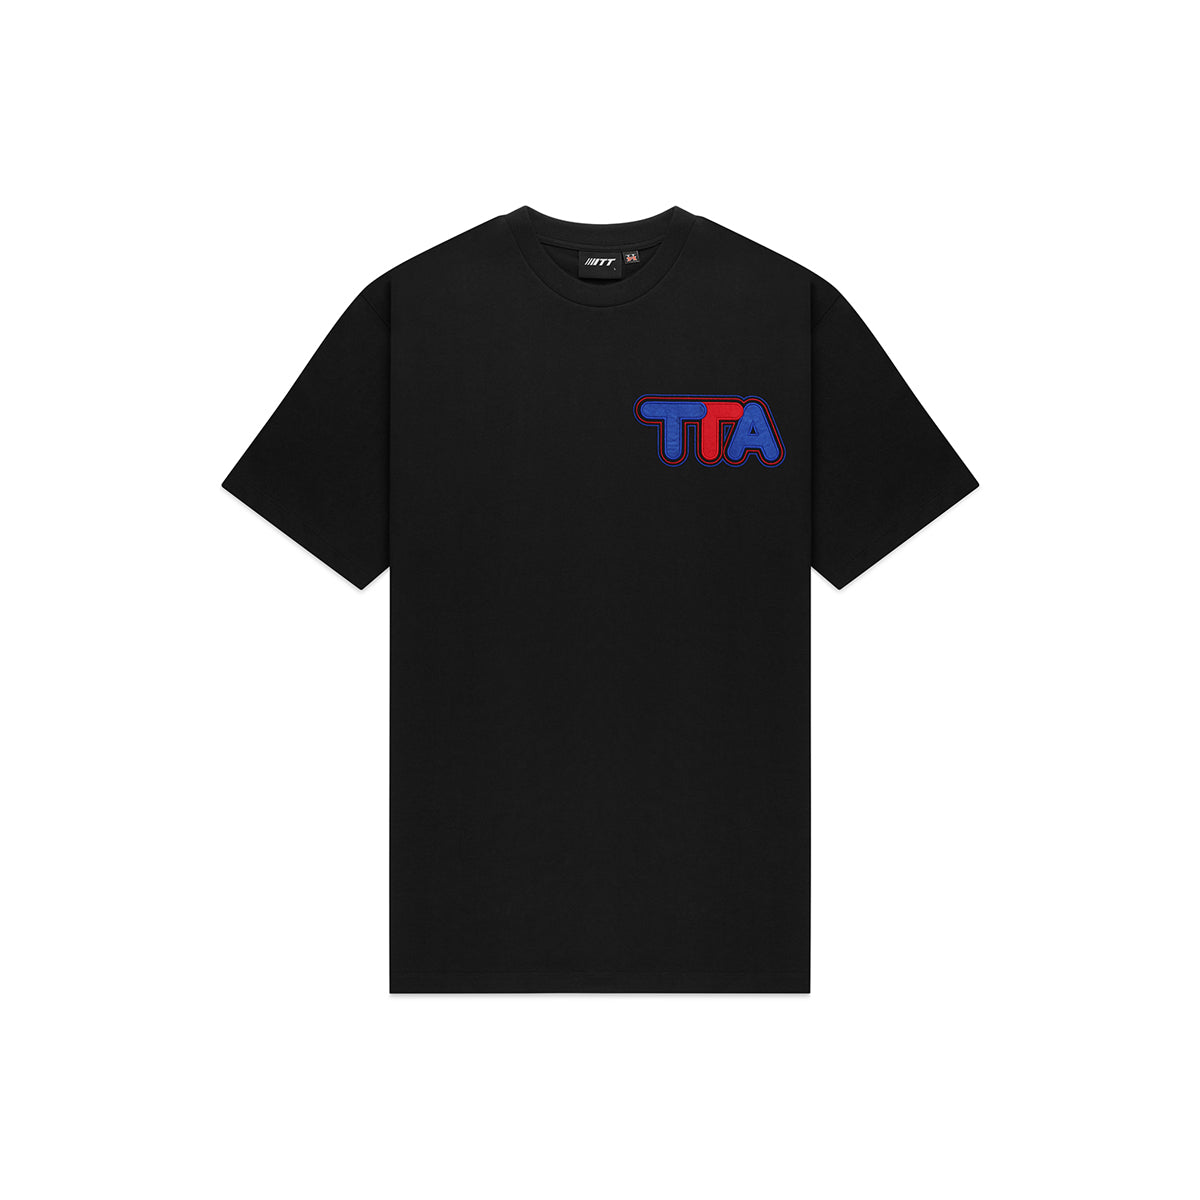 Turbo Threads Black Box Fit Tee with blue and red turbo threads logo